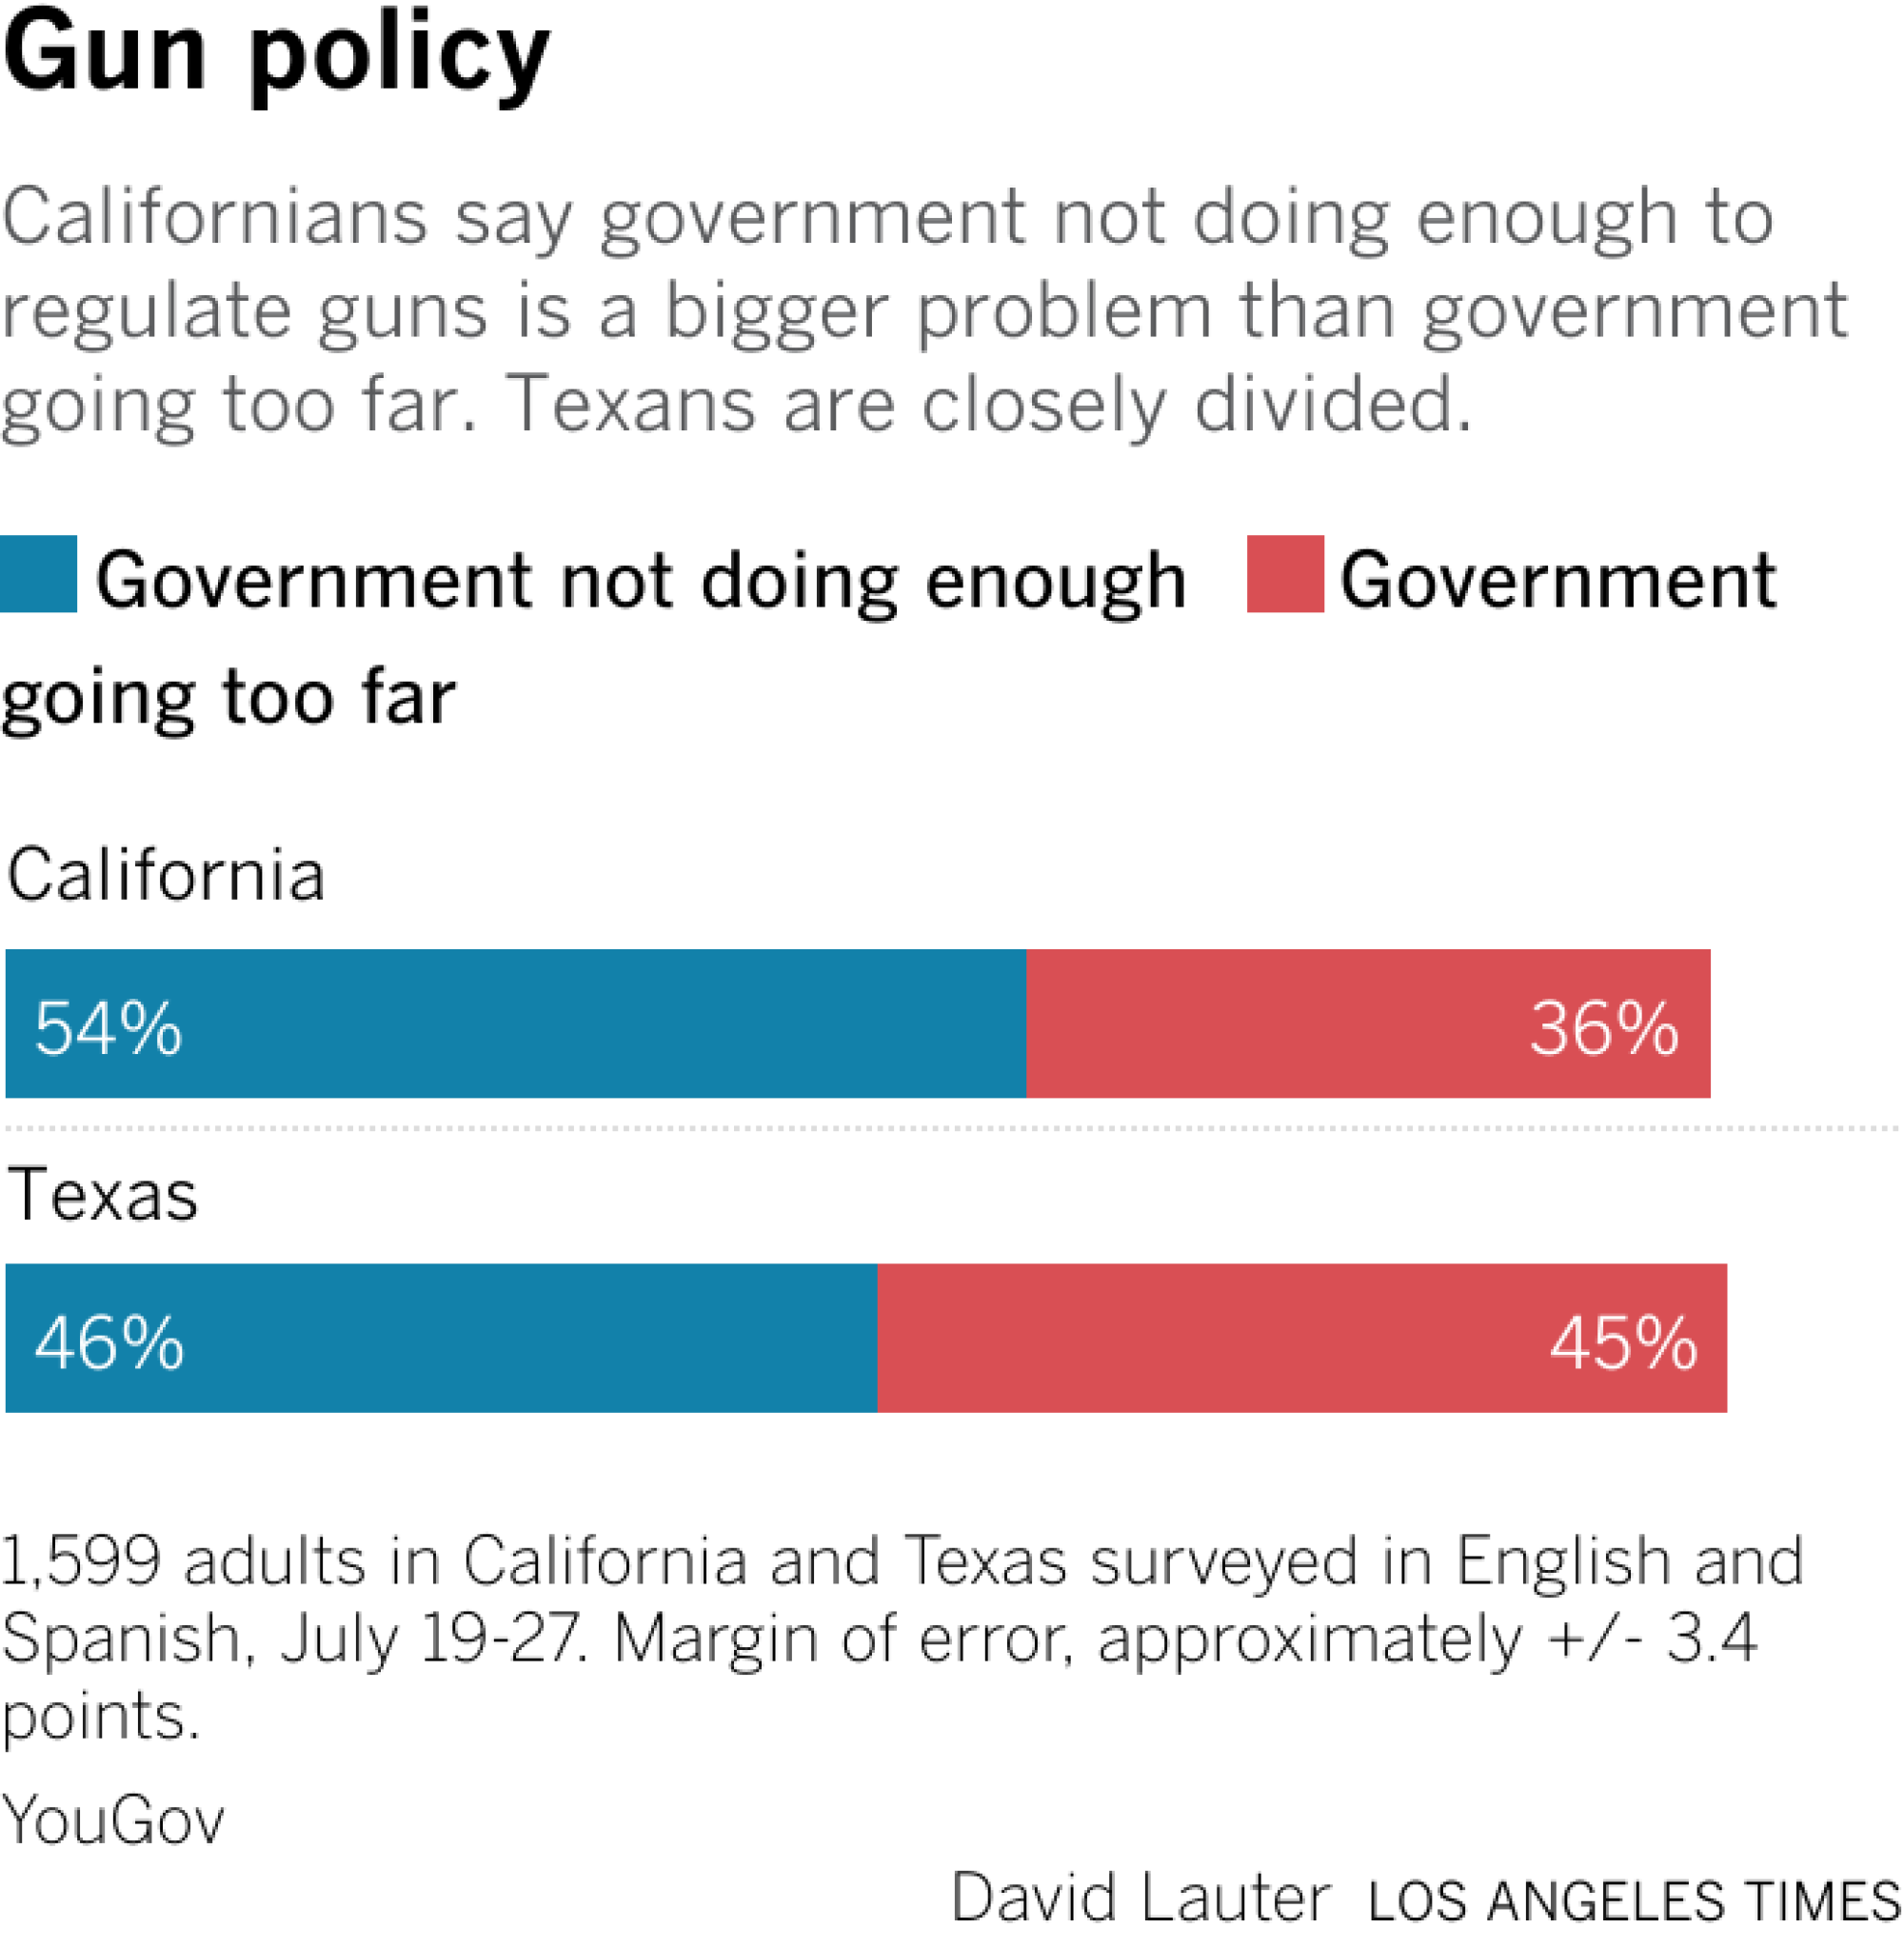 Californians say government not doing enough to regulate guns is a bigger problem than government going too far. Texans are closely divided.